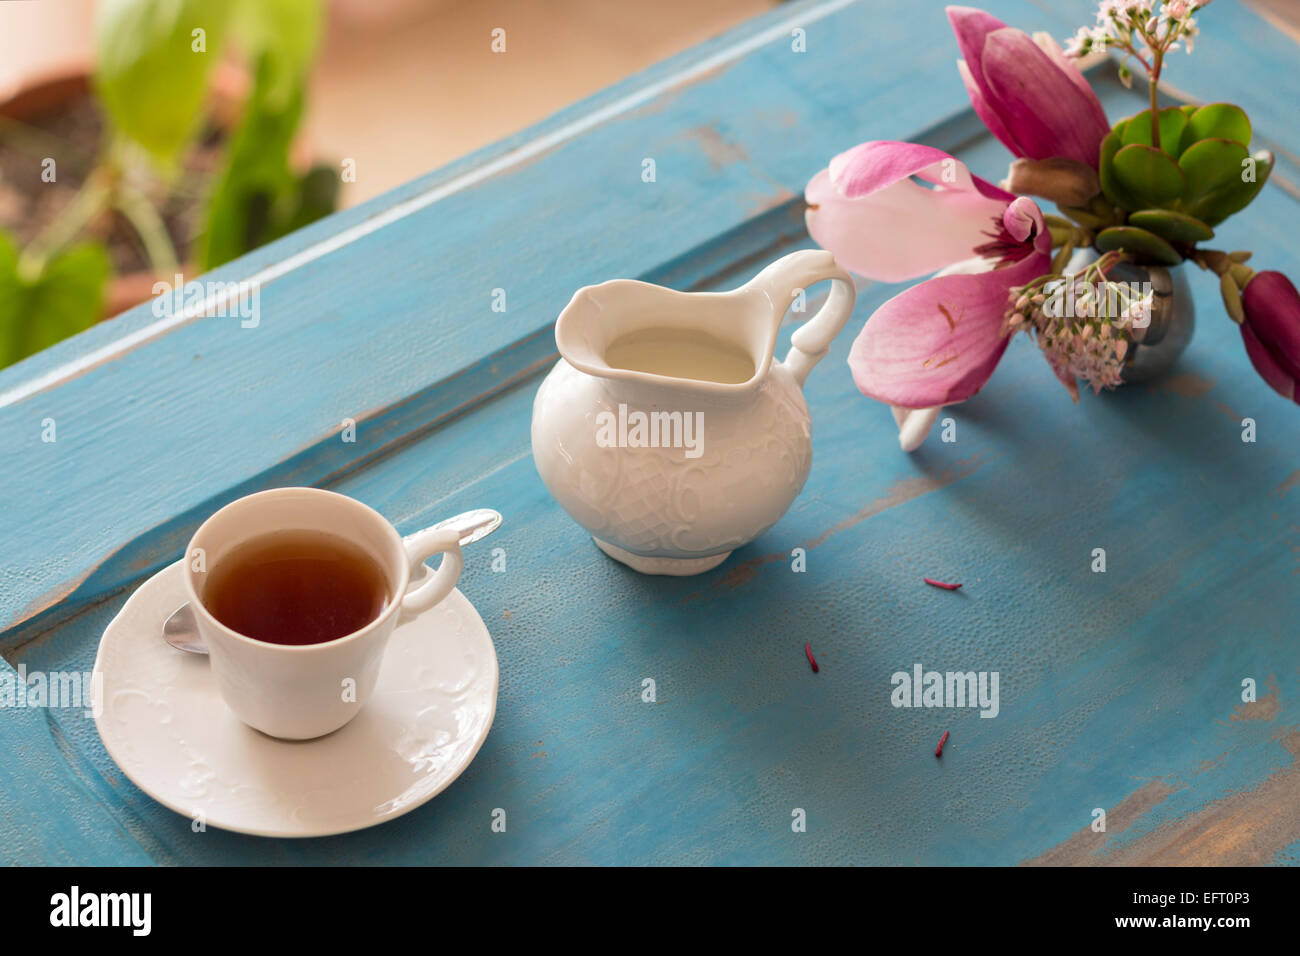 A tea cup and creamer on old wooden table. Stock Photo